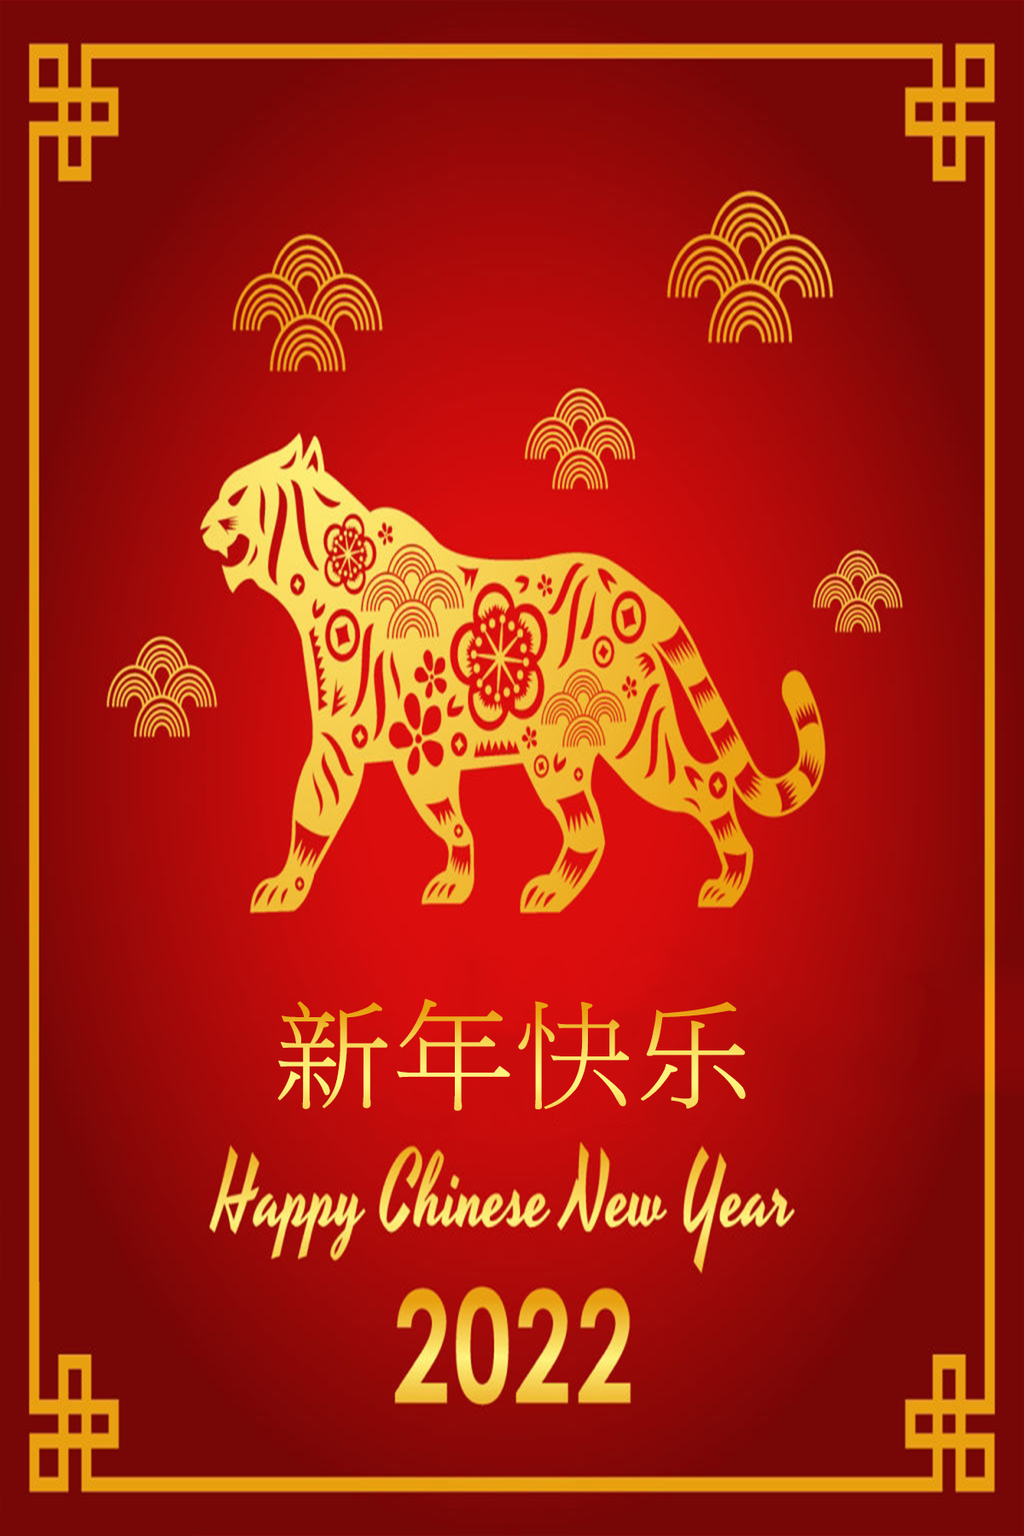 Happy Chinese New Year.png